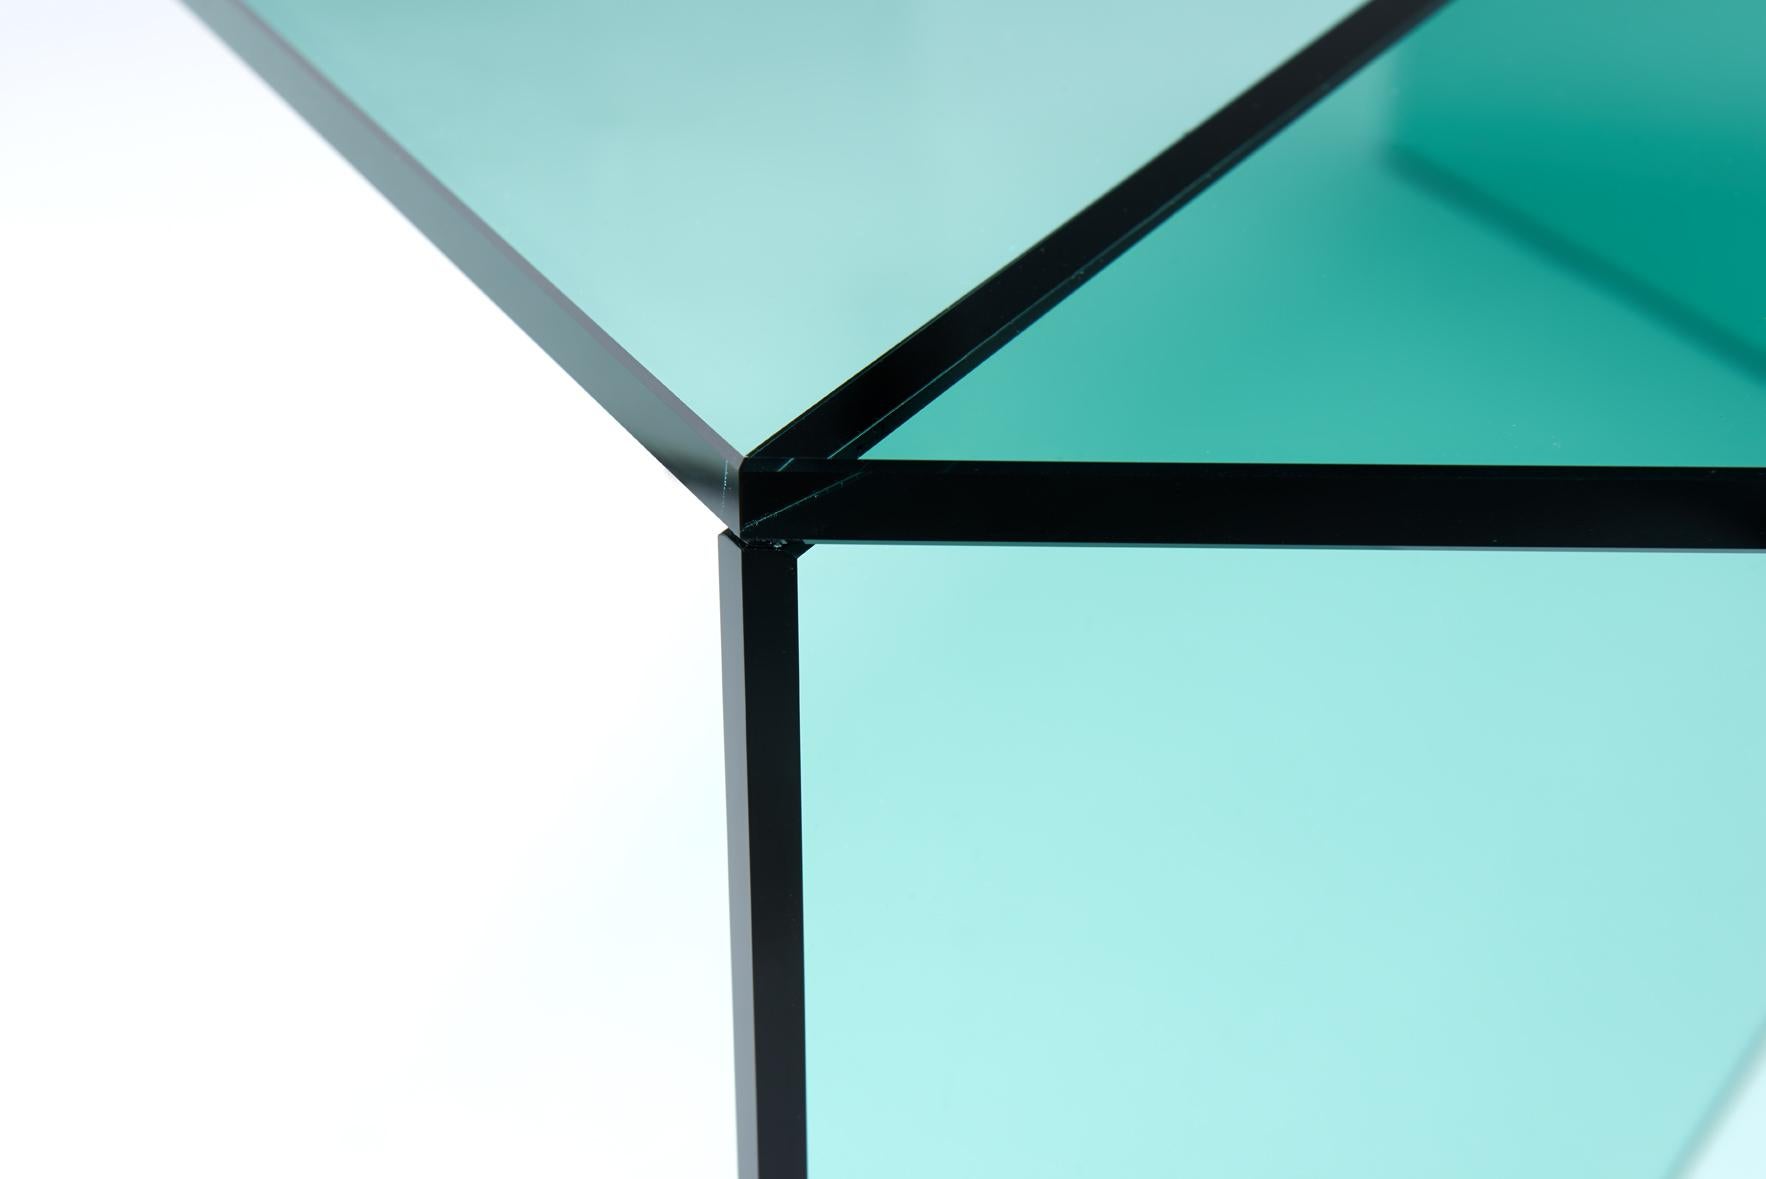 The Isom side tables create intriguing optical illusions, conjuring images of isometric cubes when viewed from certain angles. This effect is created through the CNC processing of traditional plate glass combined with a millimetre-precise bonding